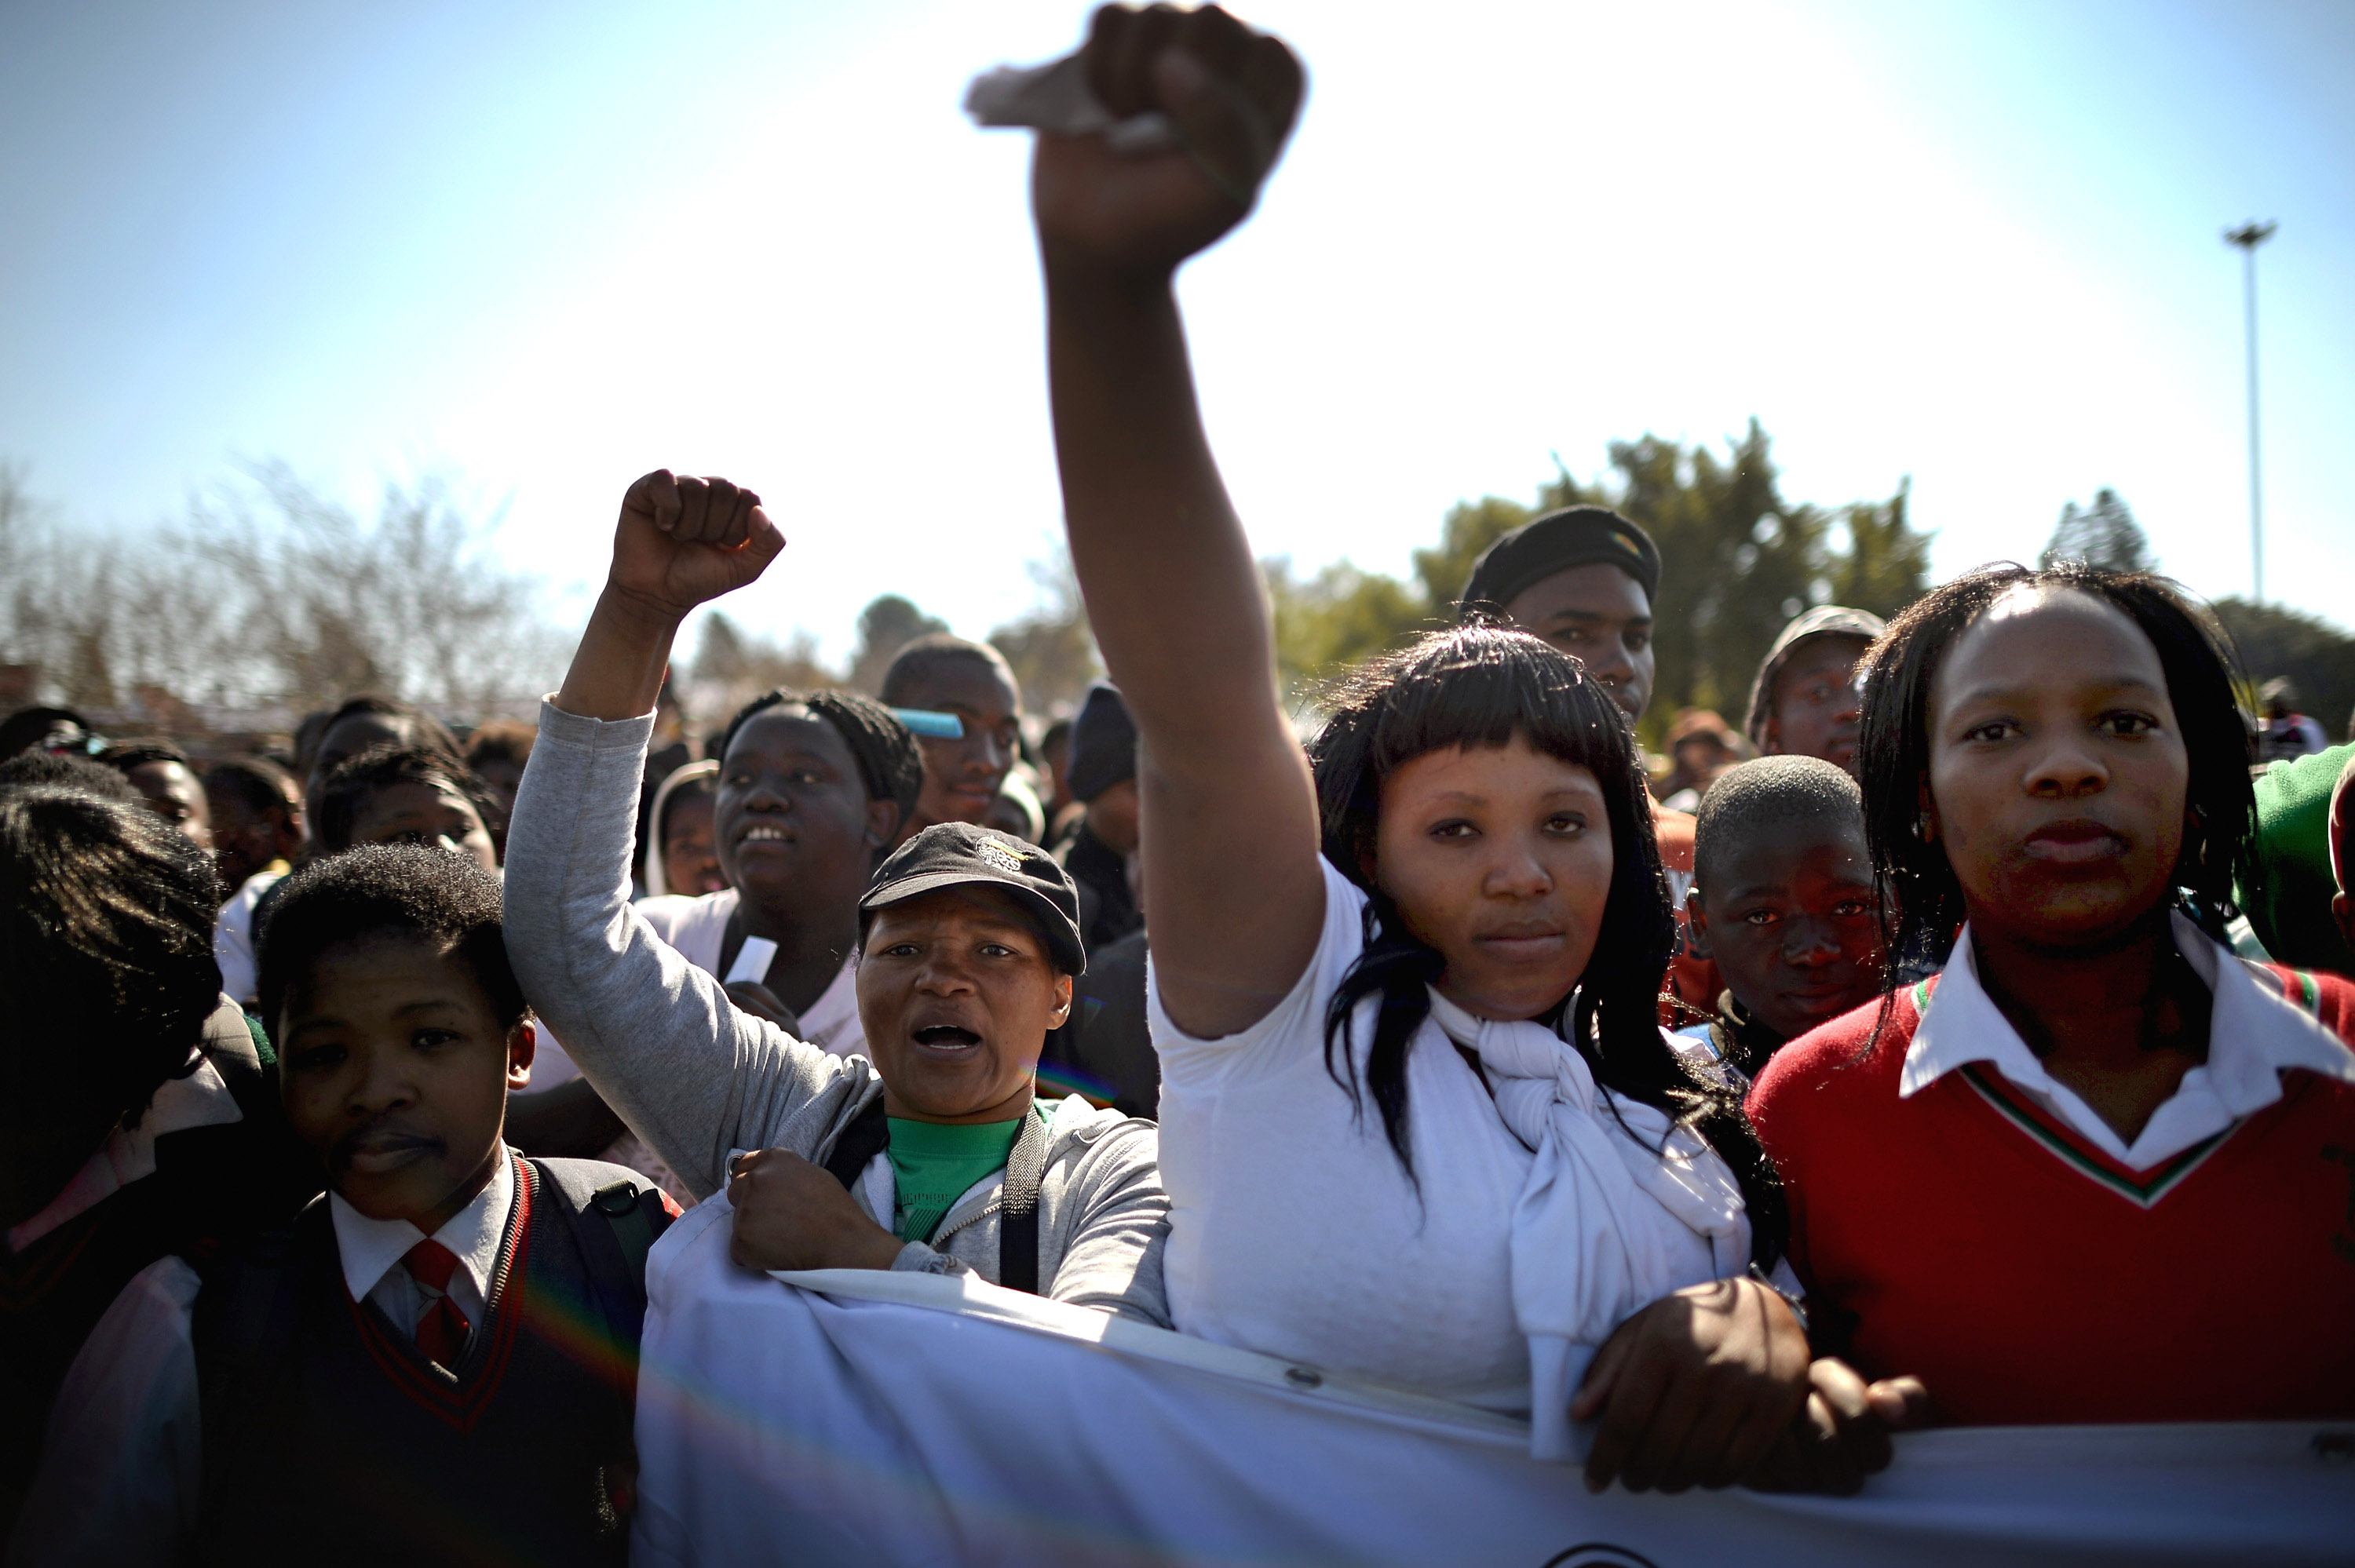 Young people participate in a march to commemorate Youth Day in Soweto Township on June 16, 2013 in Johannesburg, South Africa. Youth Day commemorates the Soweto Uprising of June 16, 1976, when students gathered on the streets of Soweto to protest against Afrikaans being the language of instruction used in schools. The protest turned violent, resulting in the deaths of students and hundreds others in the riots that followed across South Africa.  (Photo by Jeff J Mitchell/Getty Images)